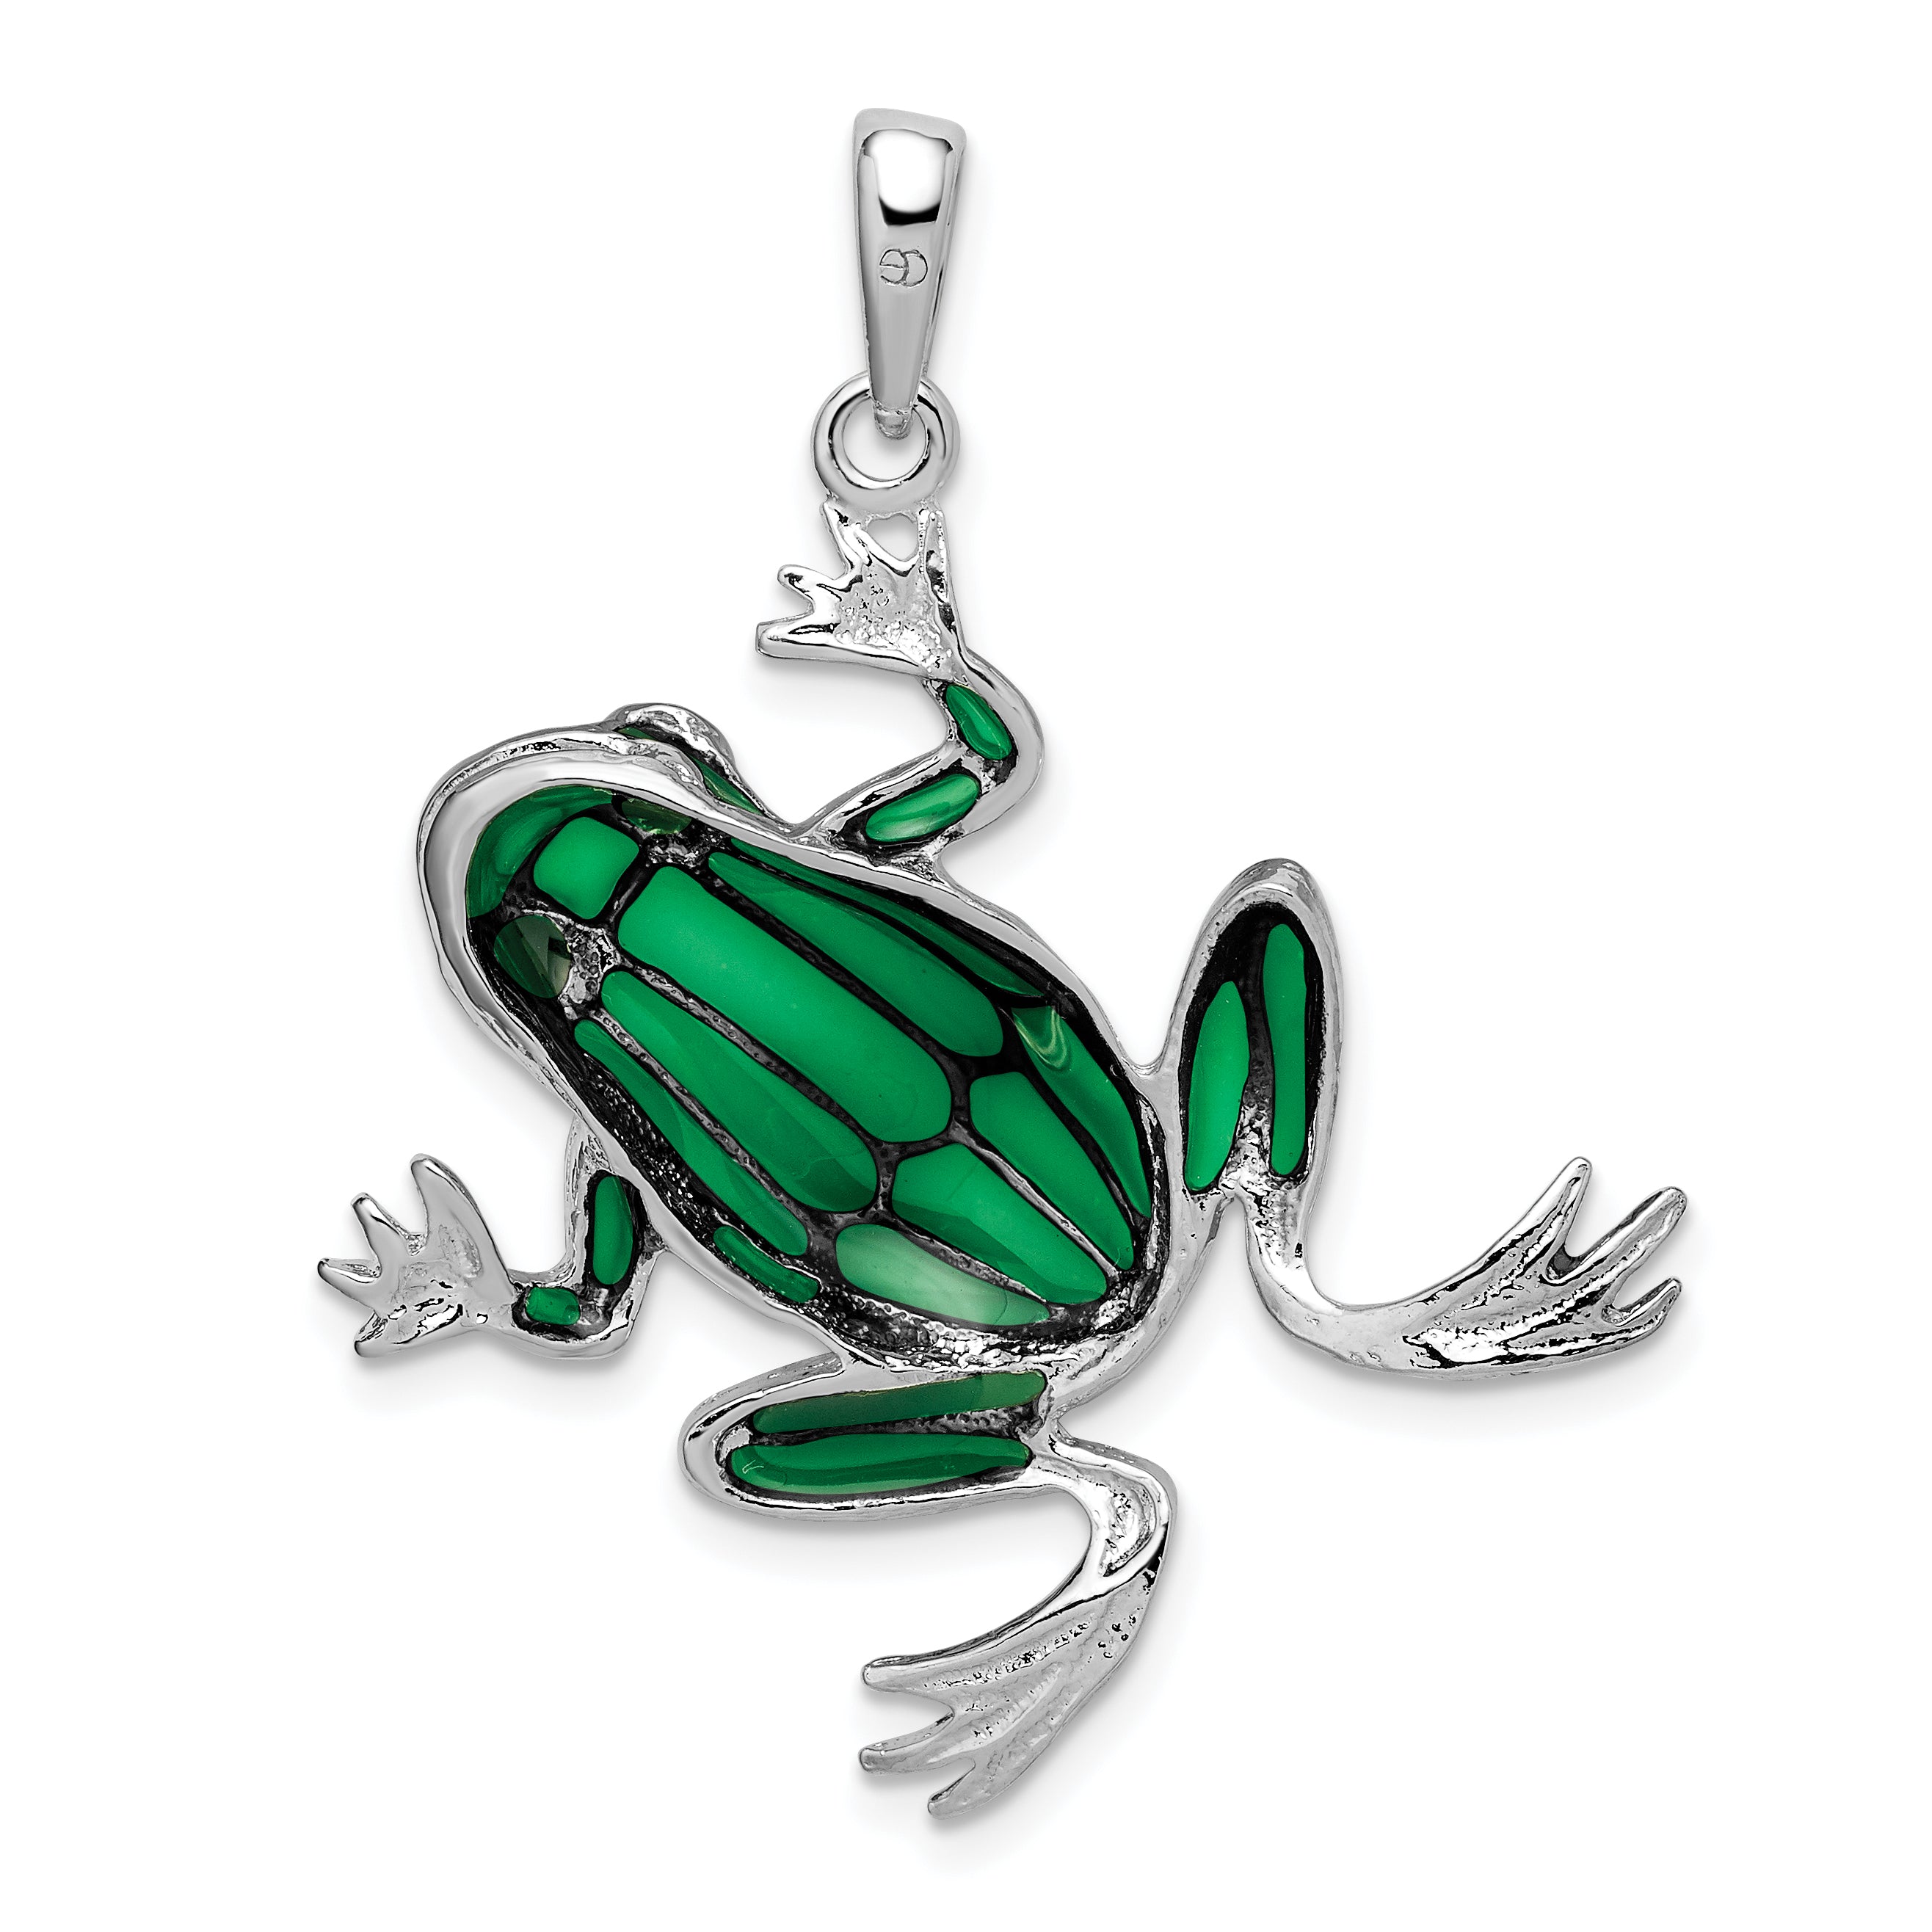 De-Ani Sterling Silver Rhodium-Plated Polished Enameled Green Frog Pendant